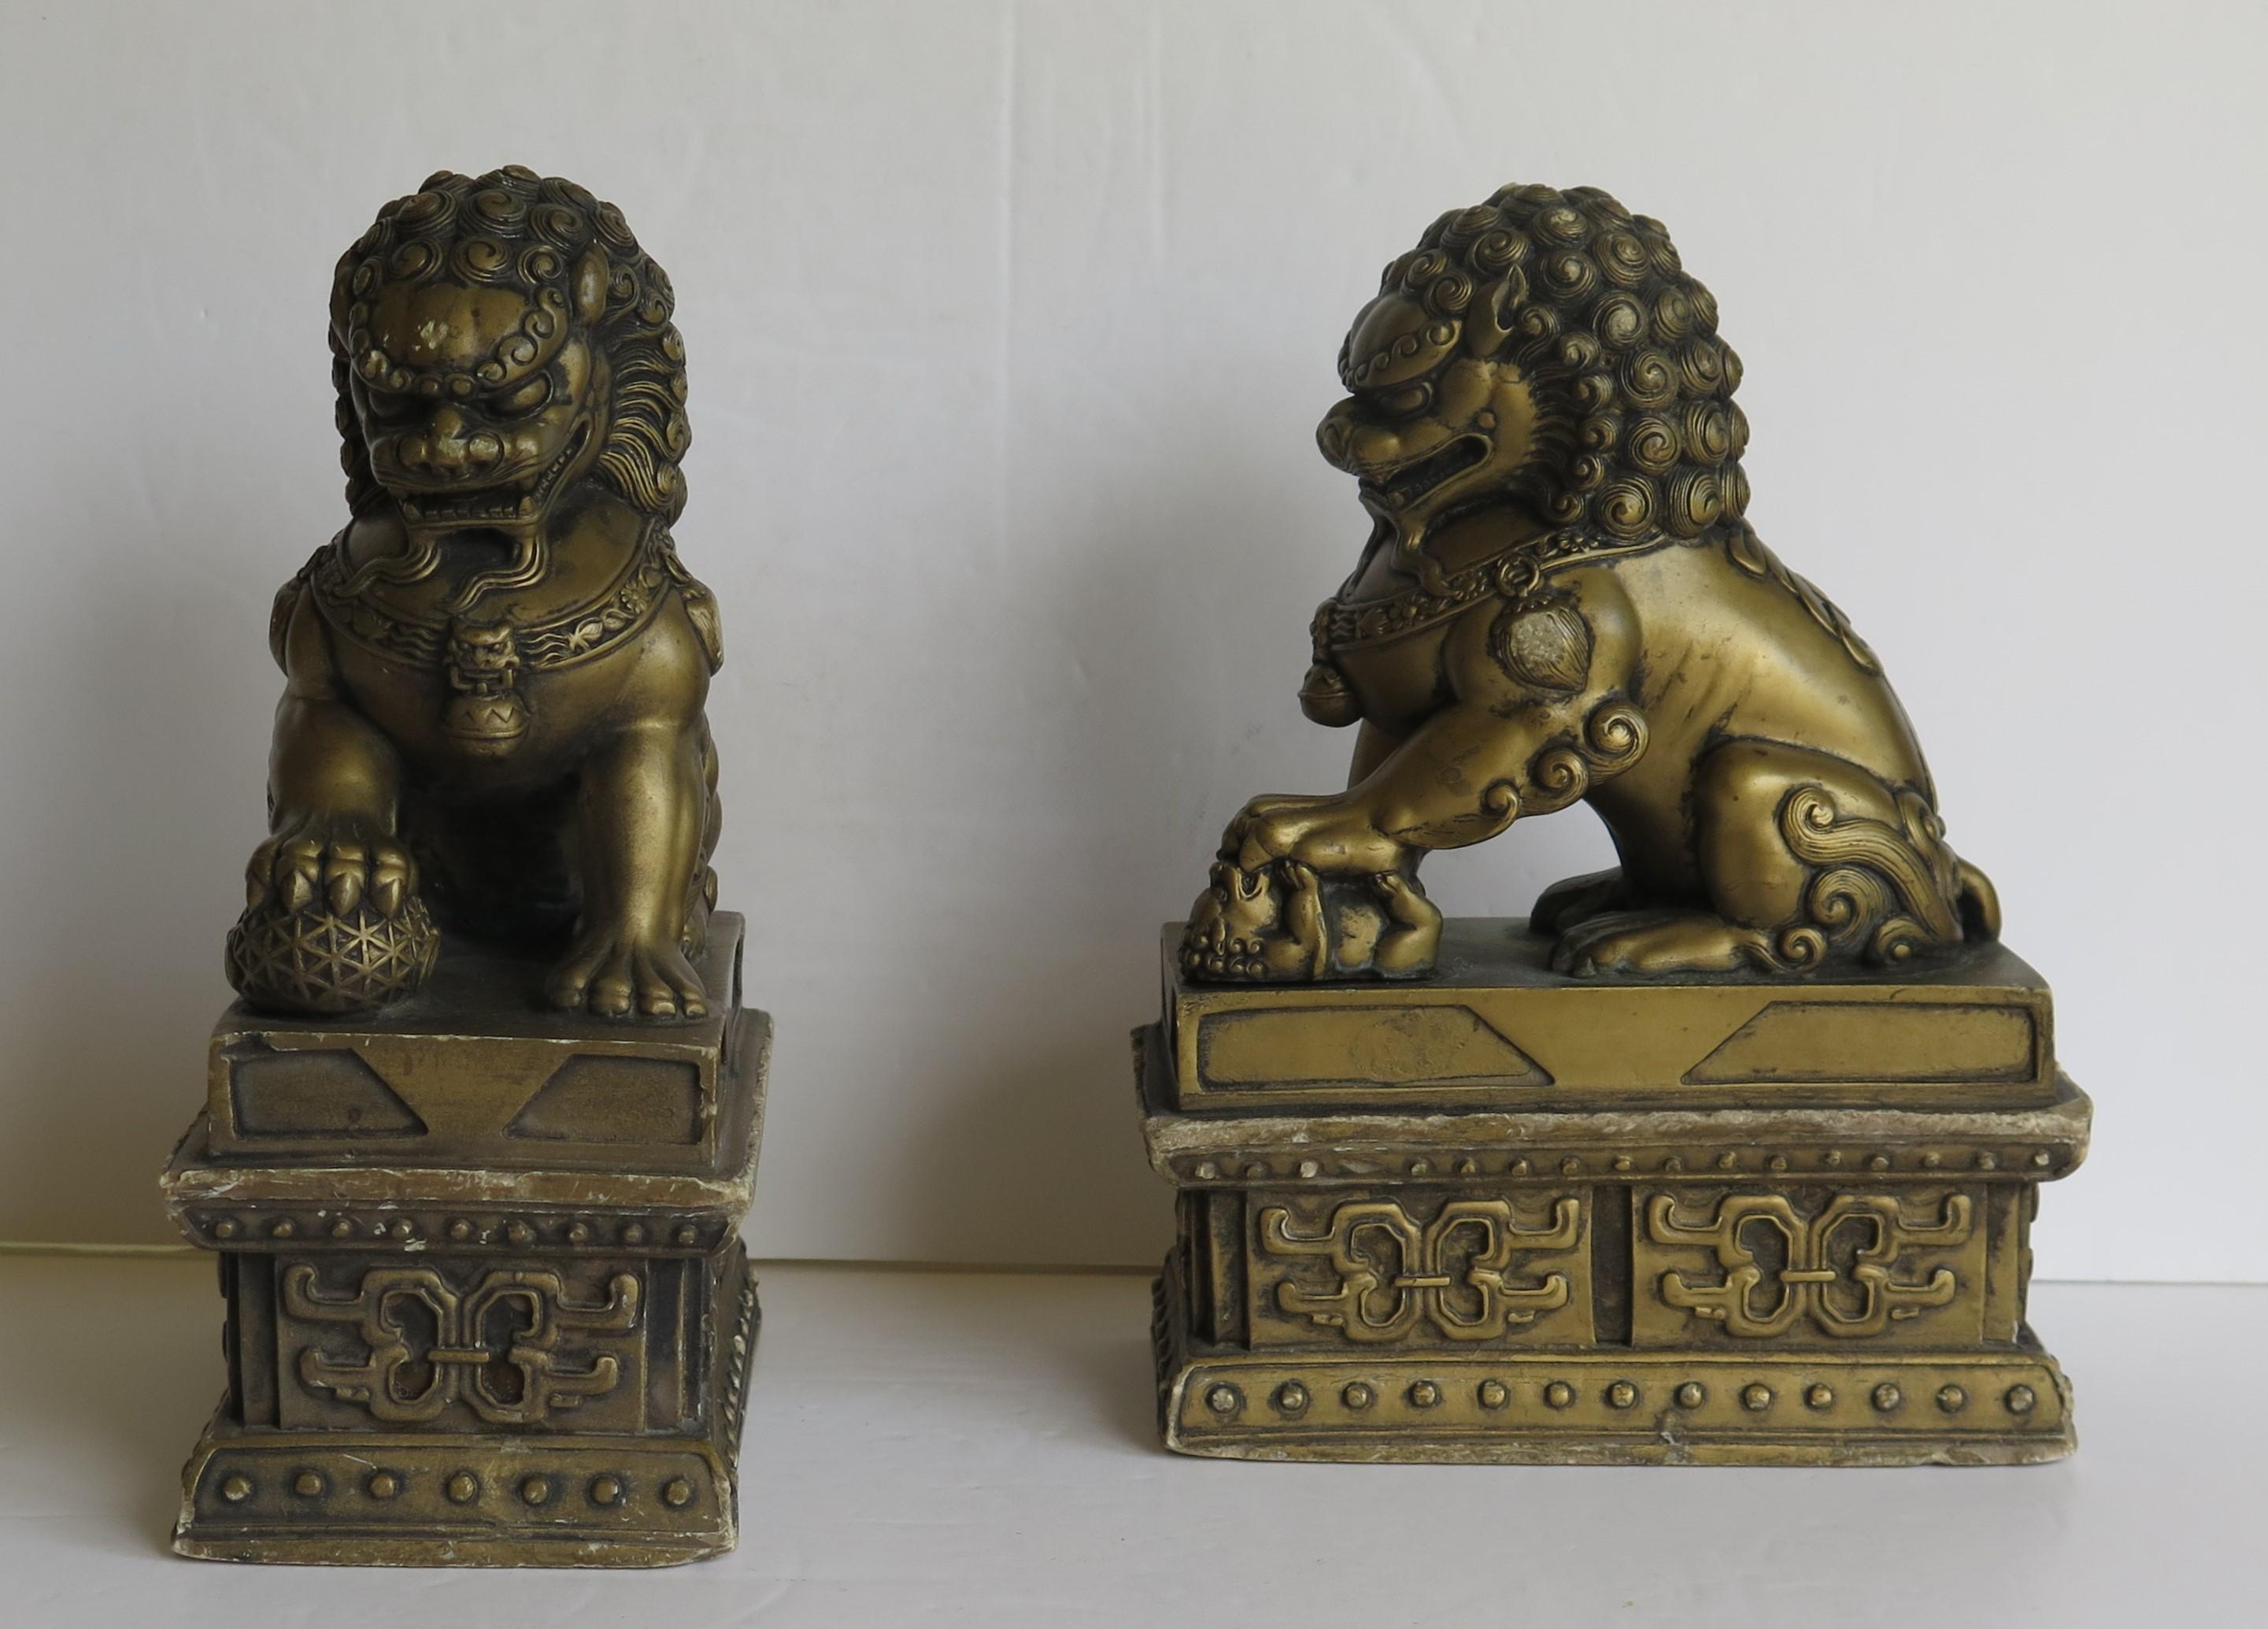 These are a very good pair of antique Chinese foo or lion dogs, sometimes called temple lions made of stone and hand gilded with fine detail, dating to the 19th century, Qing period.

They are a male and female pair, sitting on rectangular